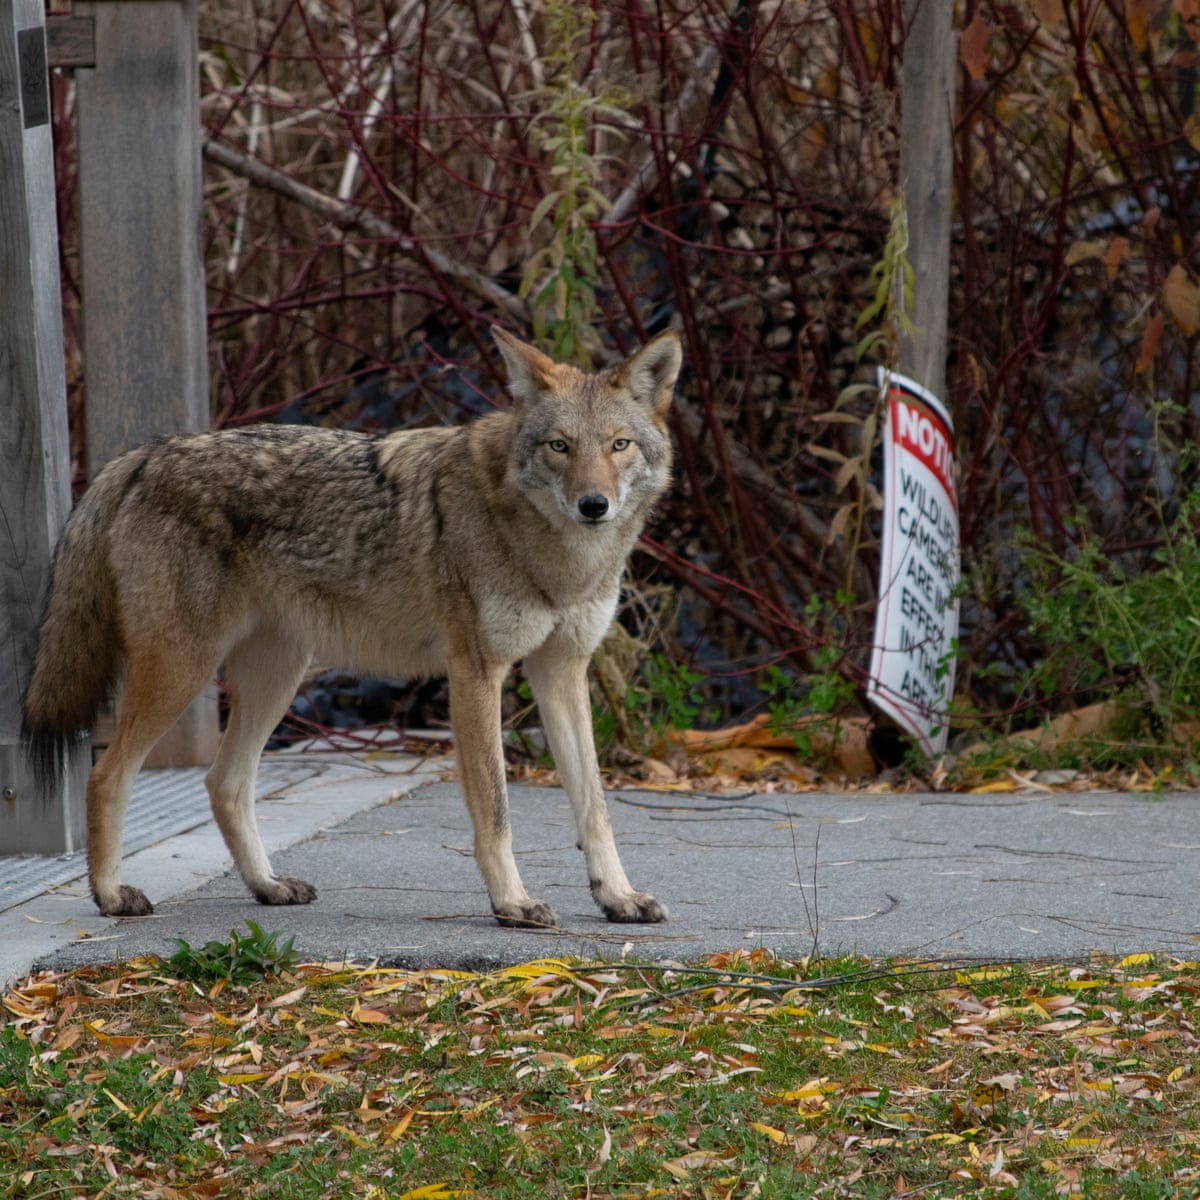 Dawn of a new creature': after a vicious attack, a city ponders living with  coyotes | Dallas | The Guardian